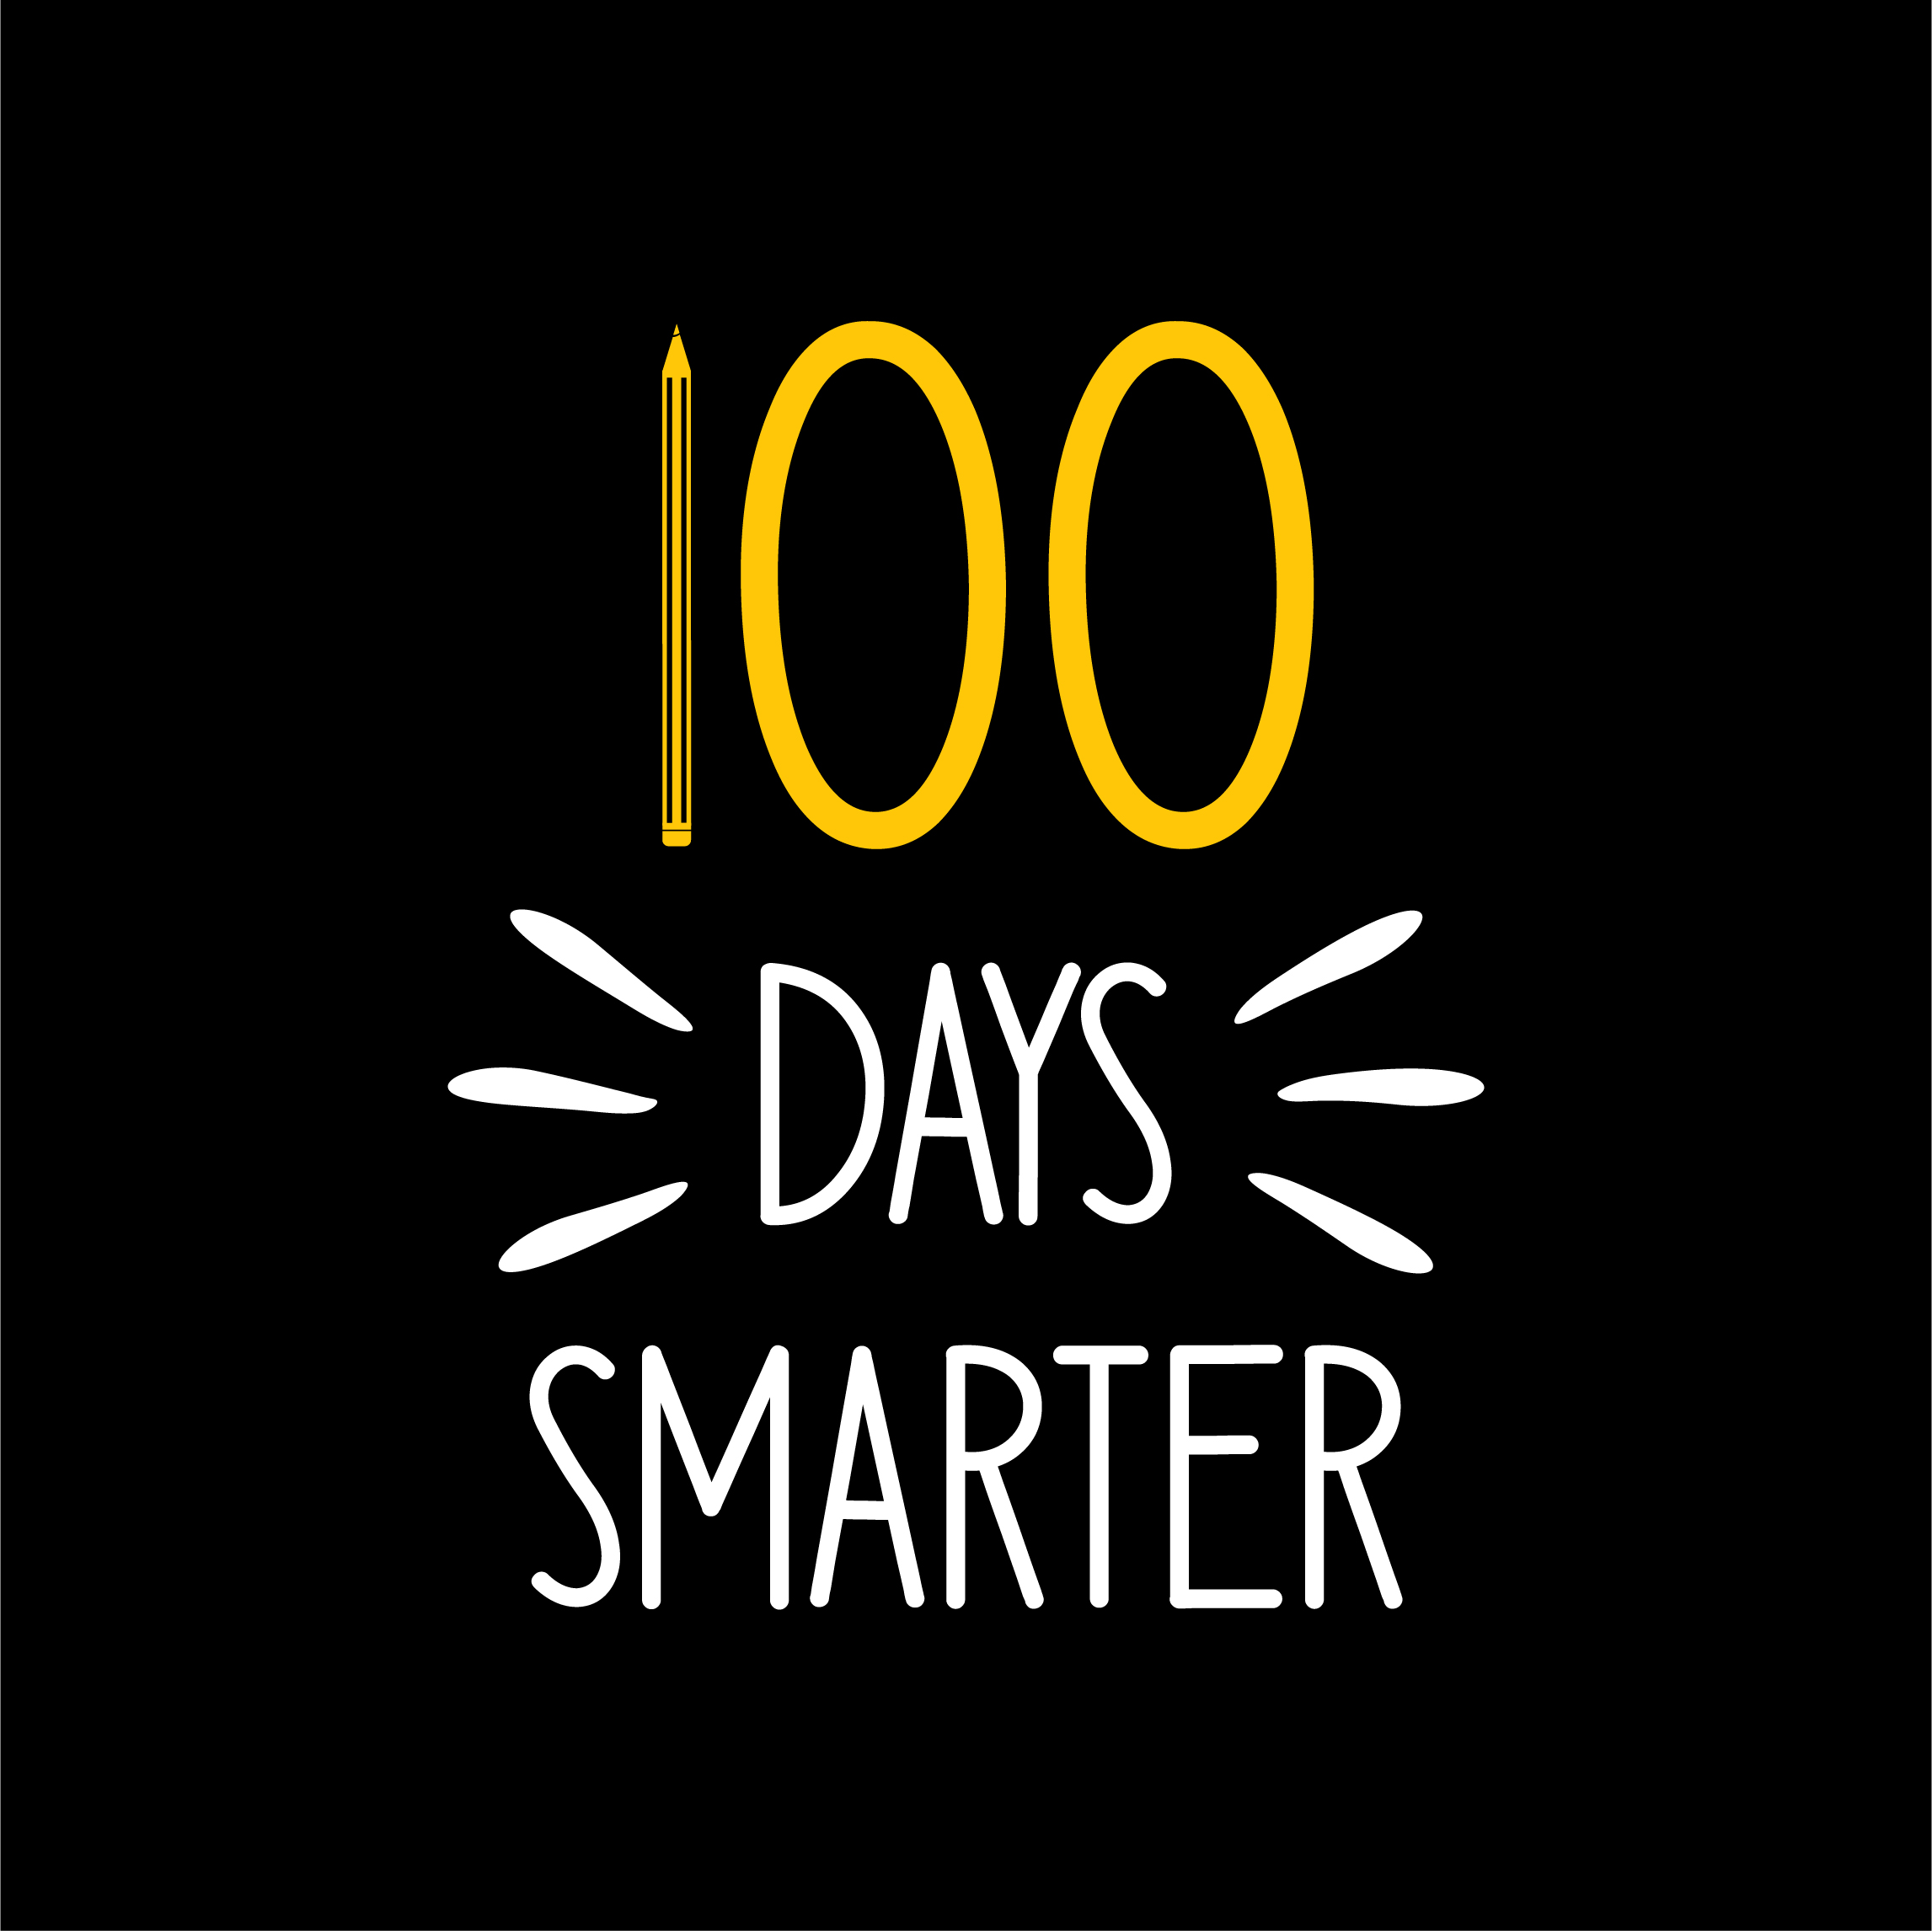 Black background with the words 100 days smarter.